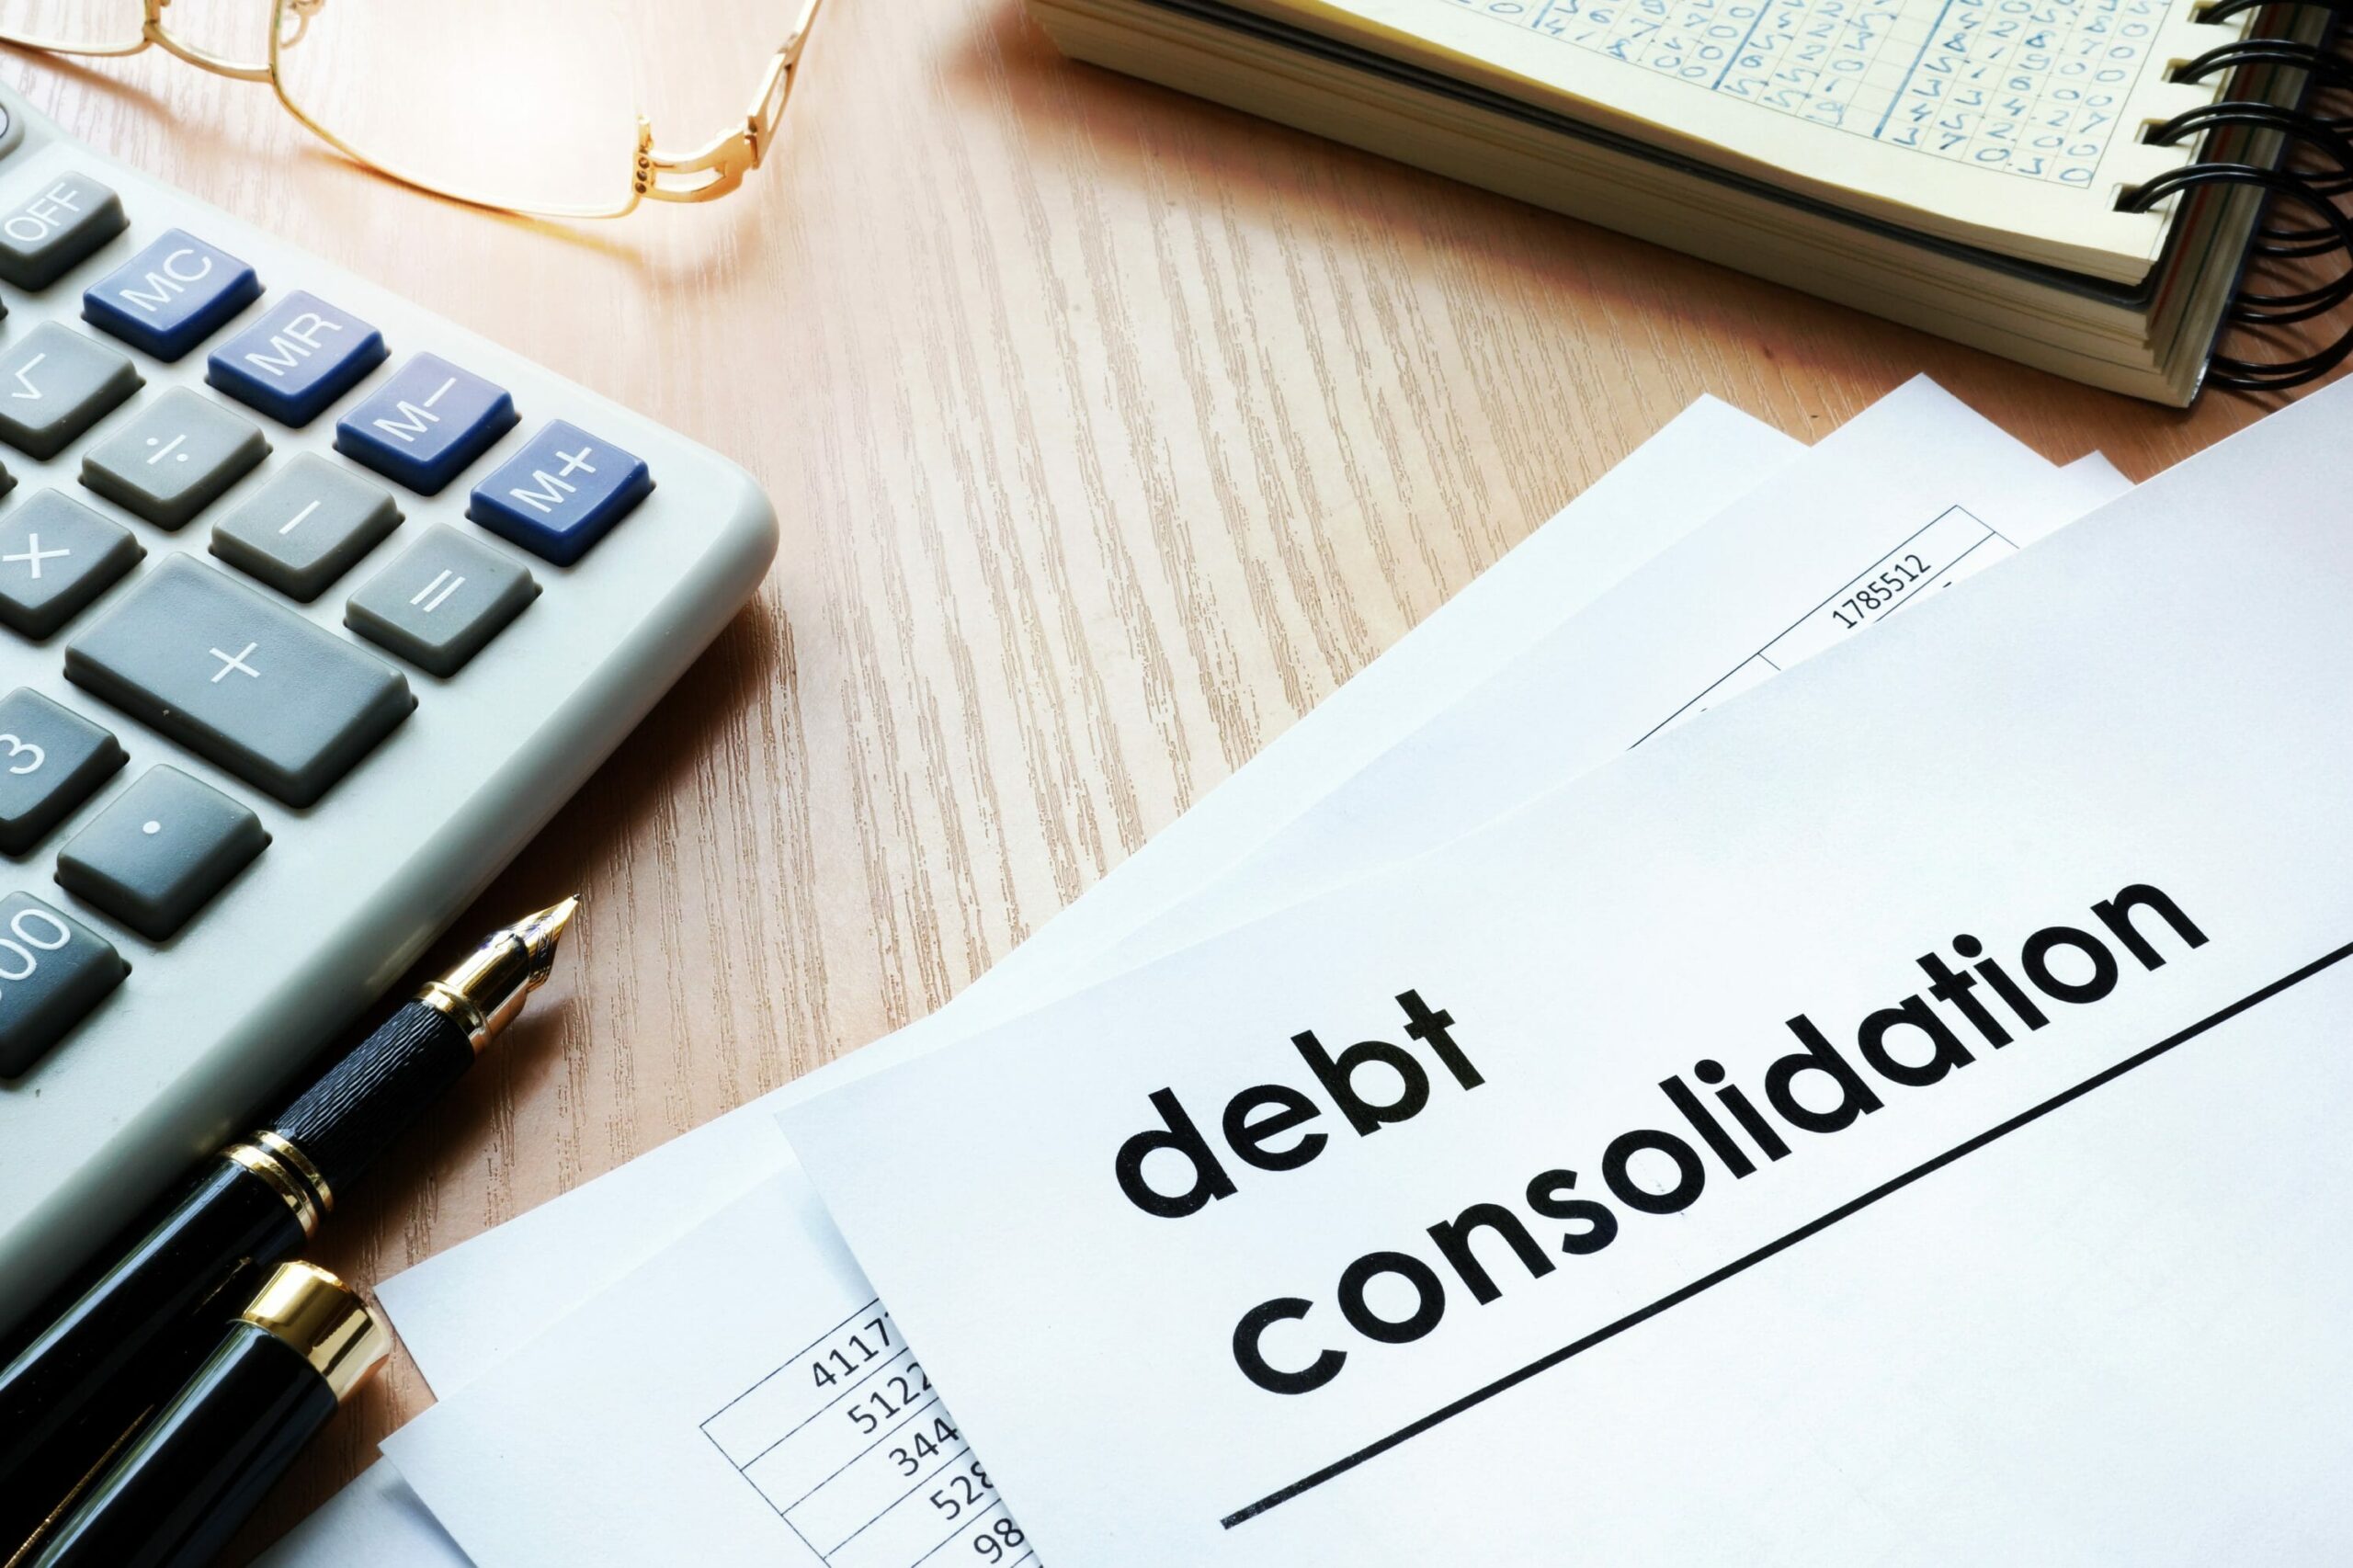 What’s debt consolidation and do I need it?